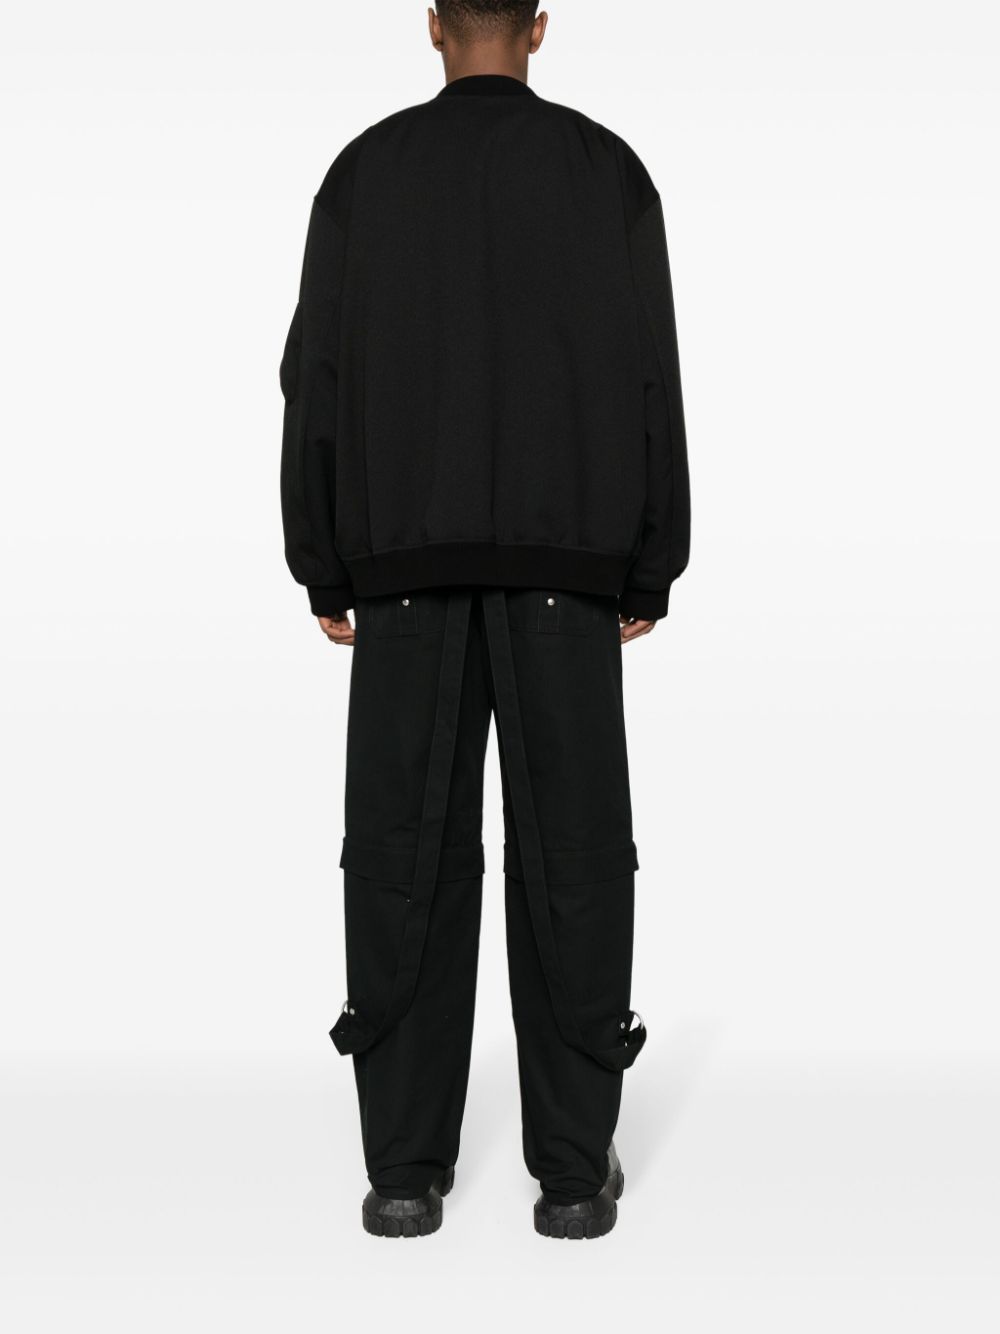 GIVENCHY Black Cargo Trousers for Men